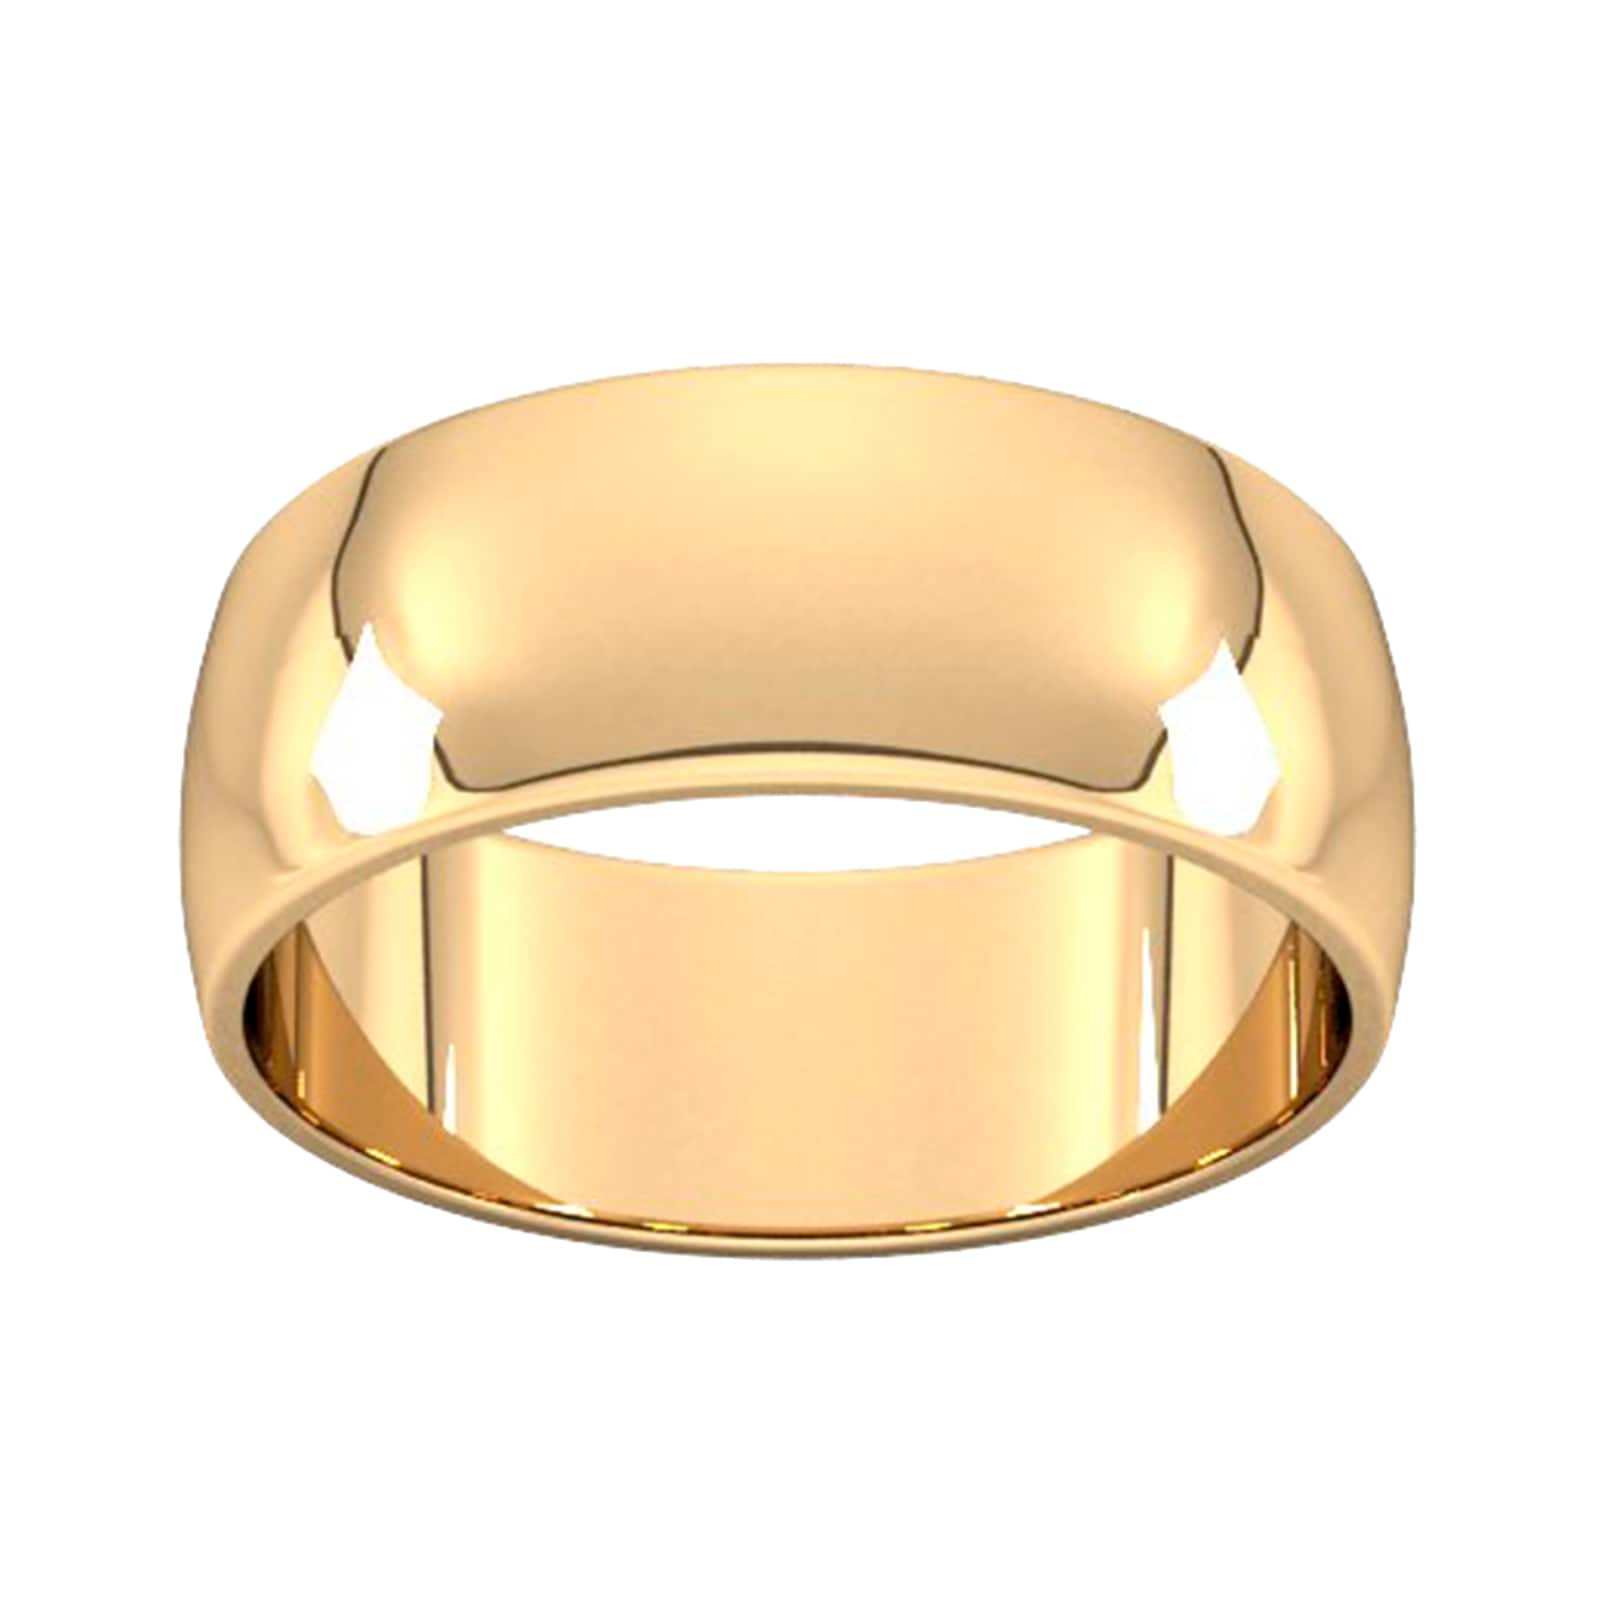 8mm D Shape Standard Wedding Ring In 18 Carat Yellow Gold - Ring Size X